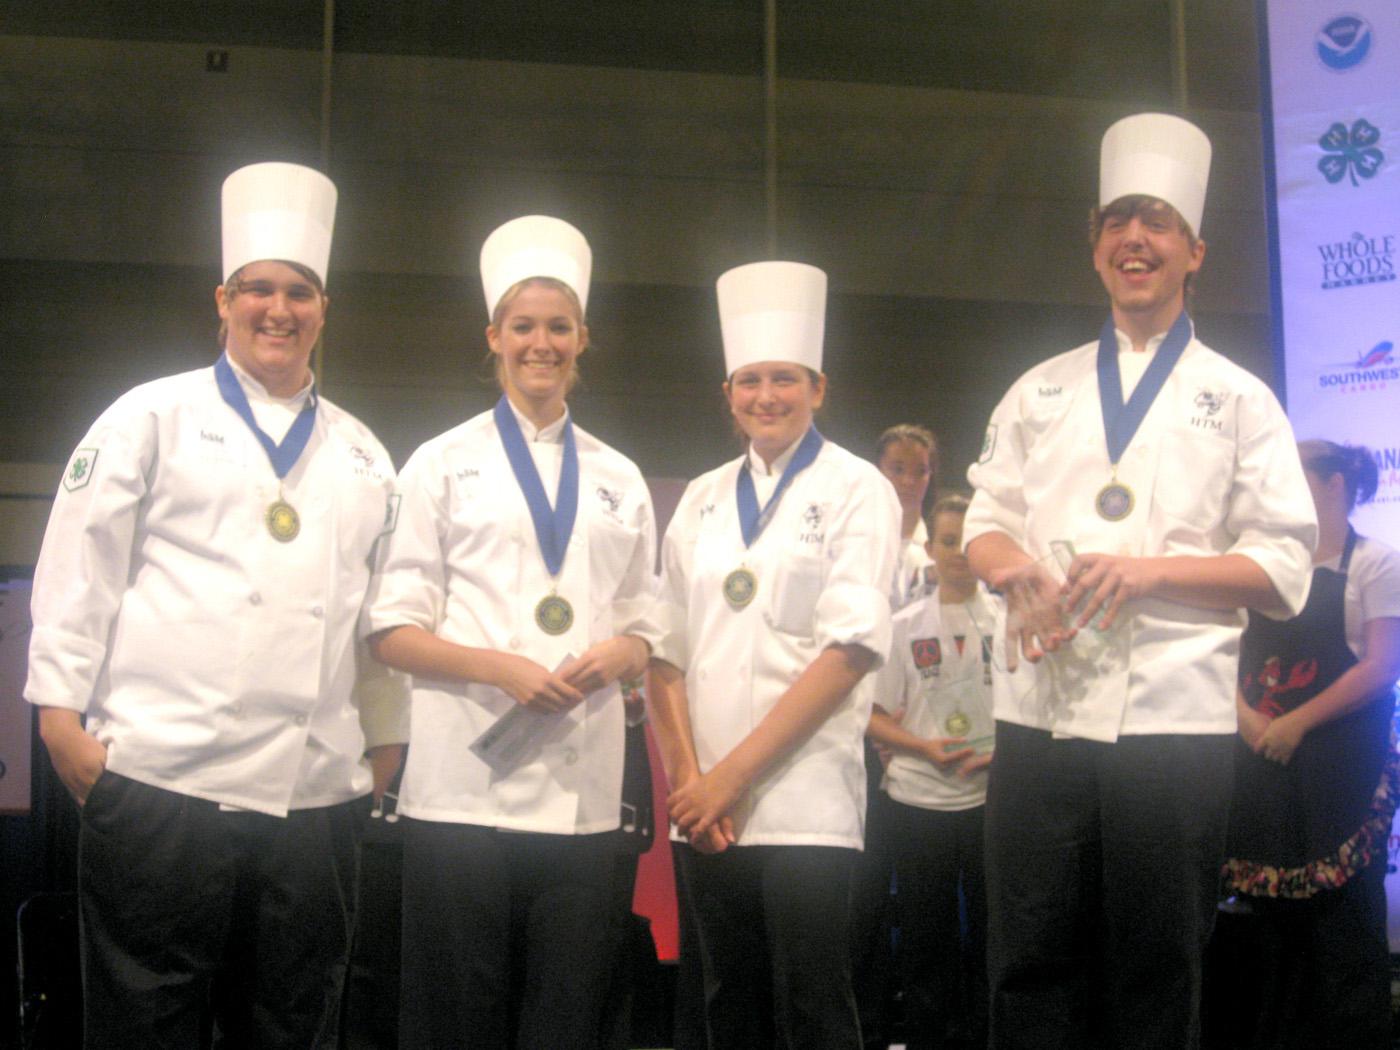 The Jackson County 4-H team of chefs from St. Martin High School (from left), Cory Martin, Sarah Soares, Adriana Wilson, and Jarod Harris, were named grand champions of the first-ever Southern Regional 4-H Seafood Cook-Off, held in conjunction with the Great American Seafood Cook-Off in New Orleans. (Submitted photo.)